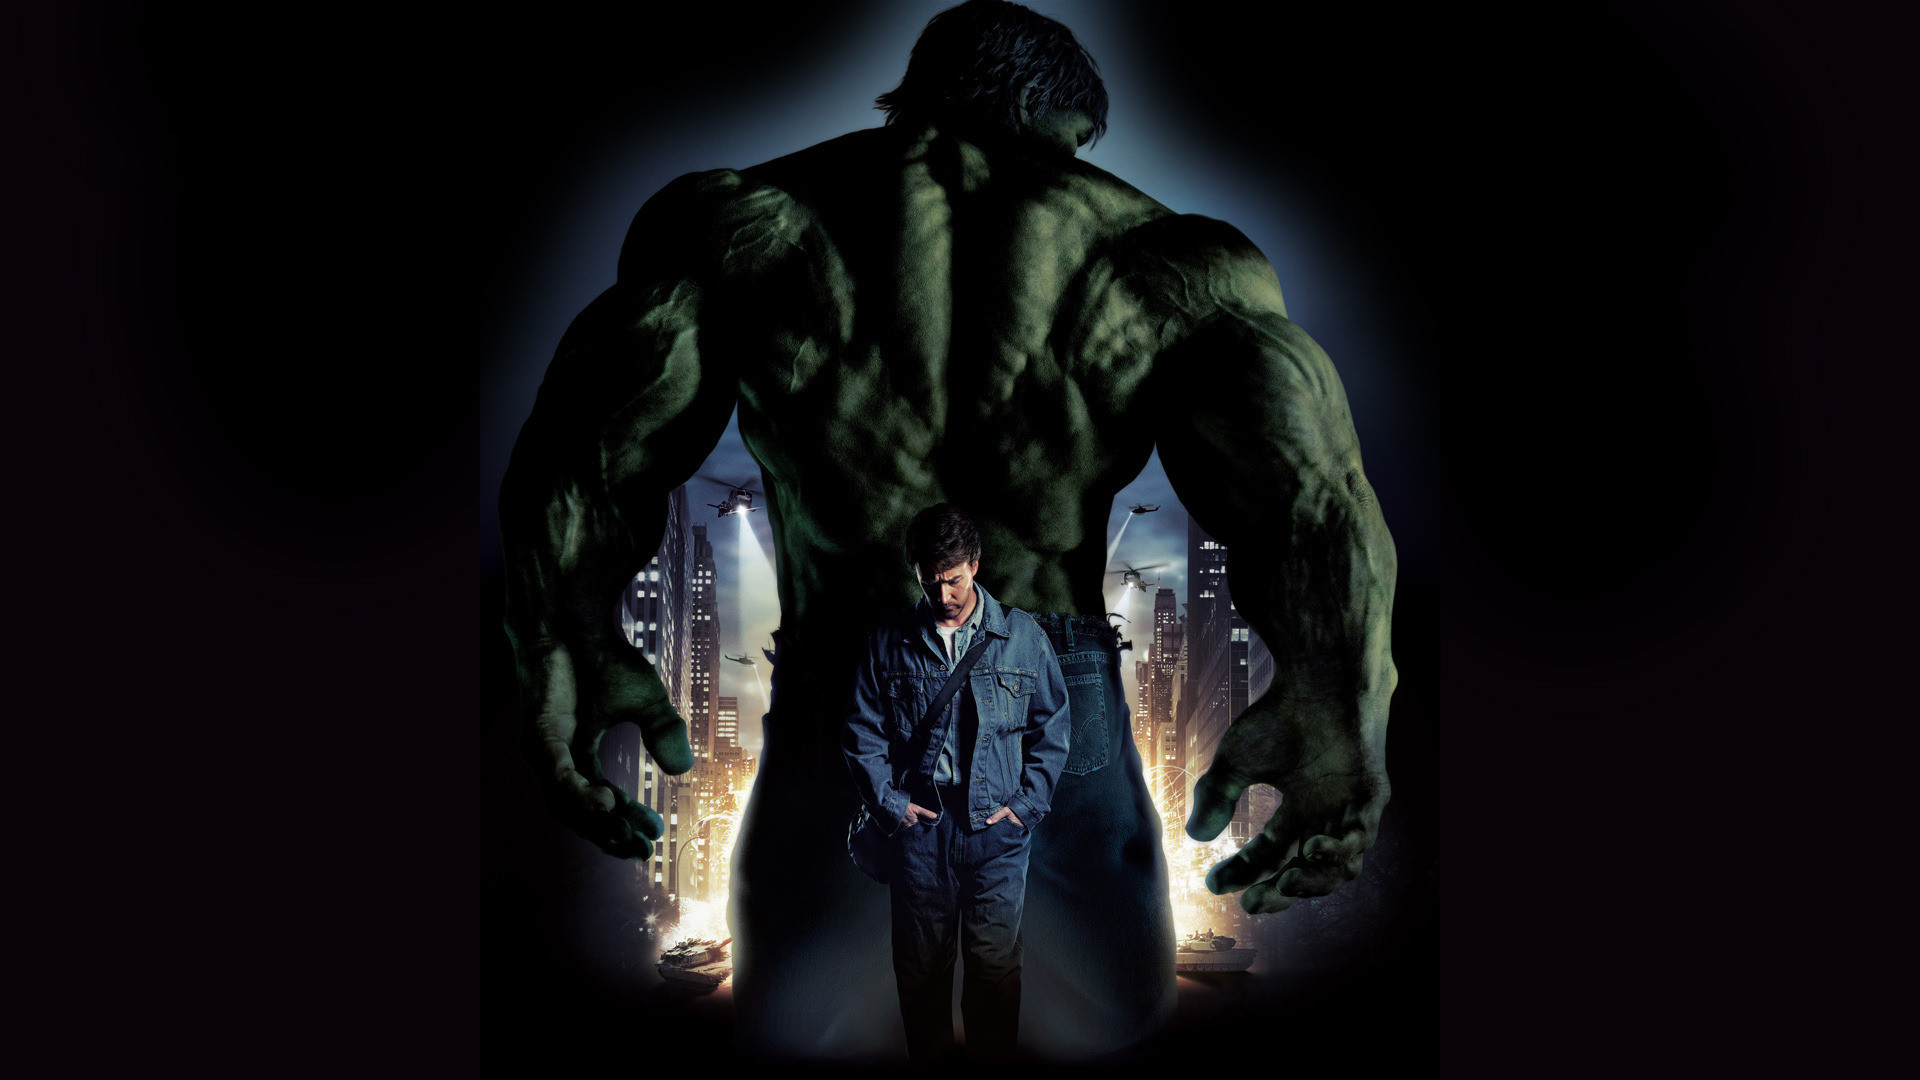 Why And How To Choose Incredible Hulk Wallpaper For Desktop